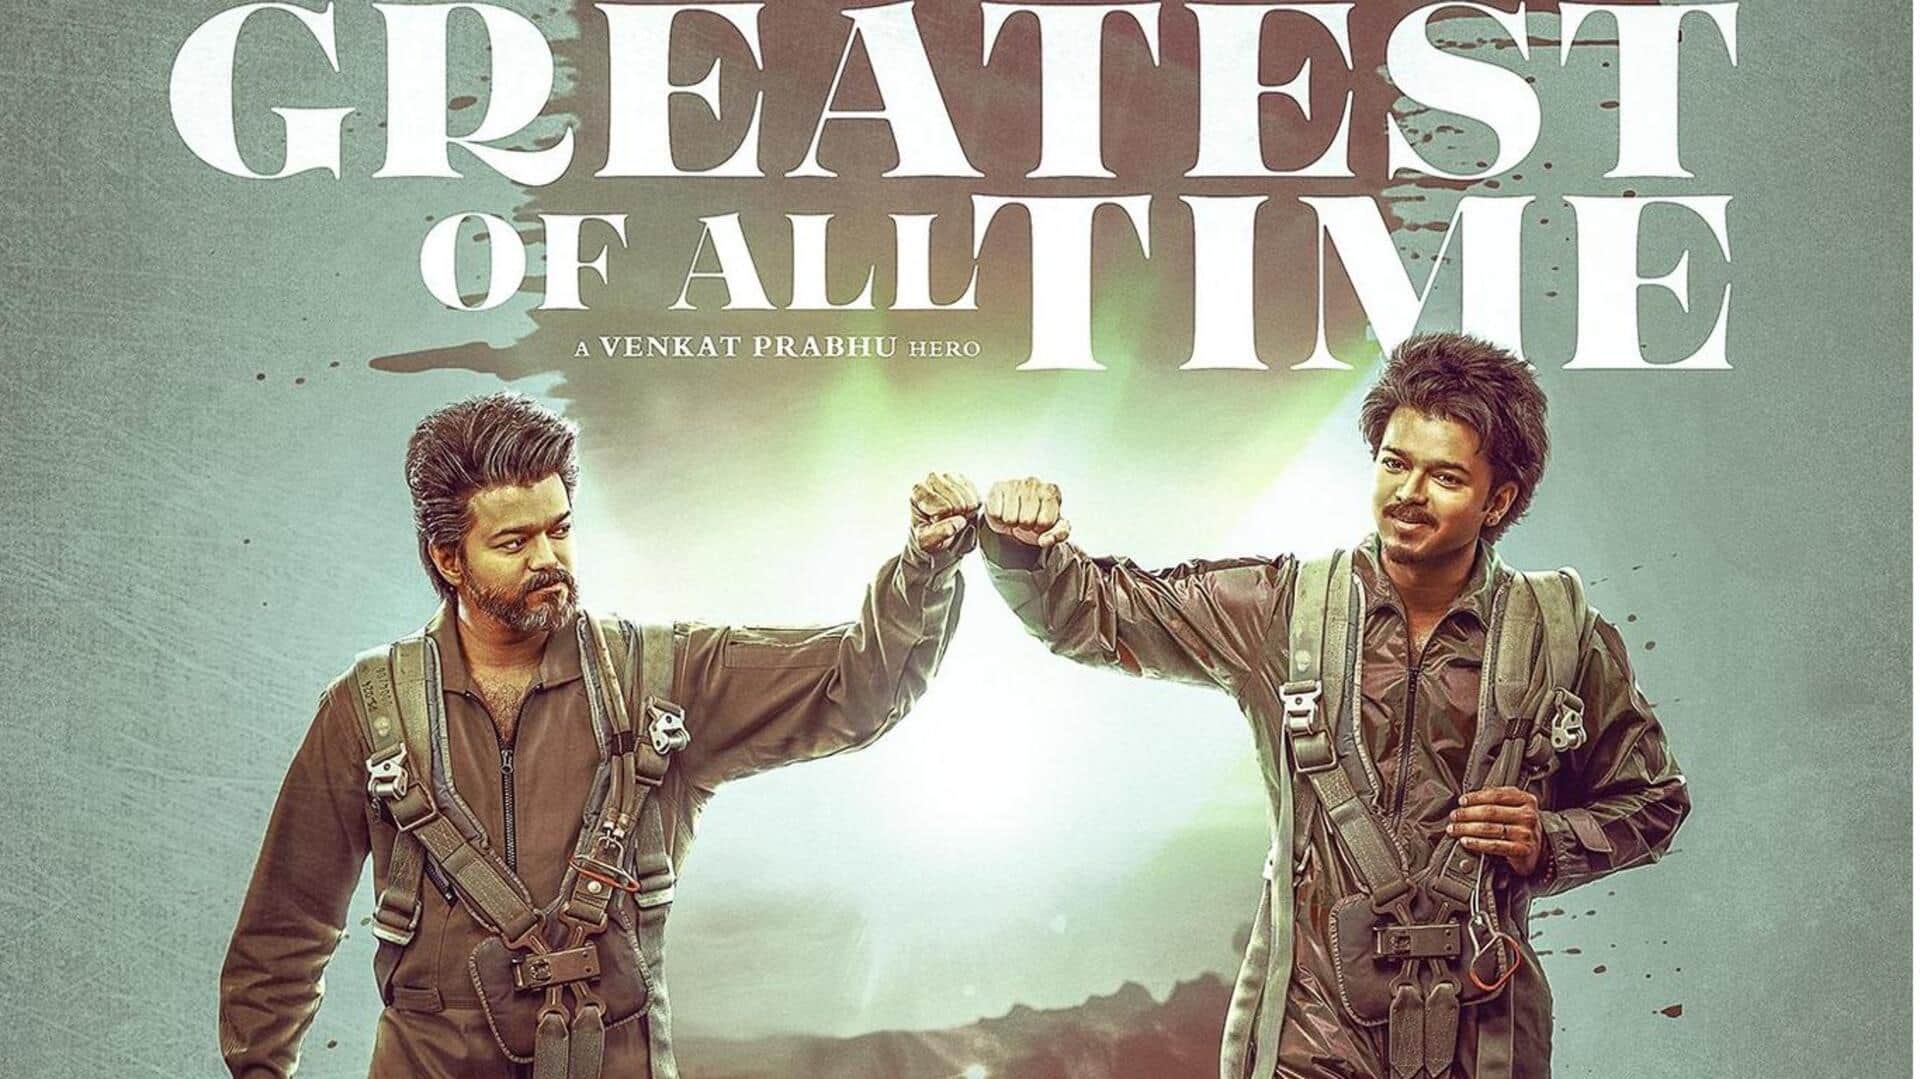 'Thalapathy 68' titled 'Greatest Of All Time,' first-look poster out